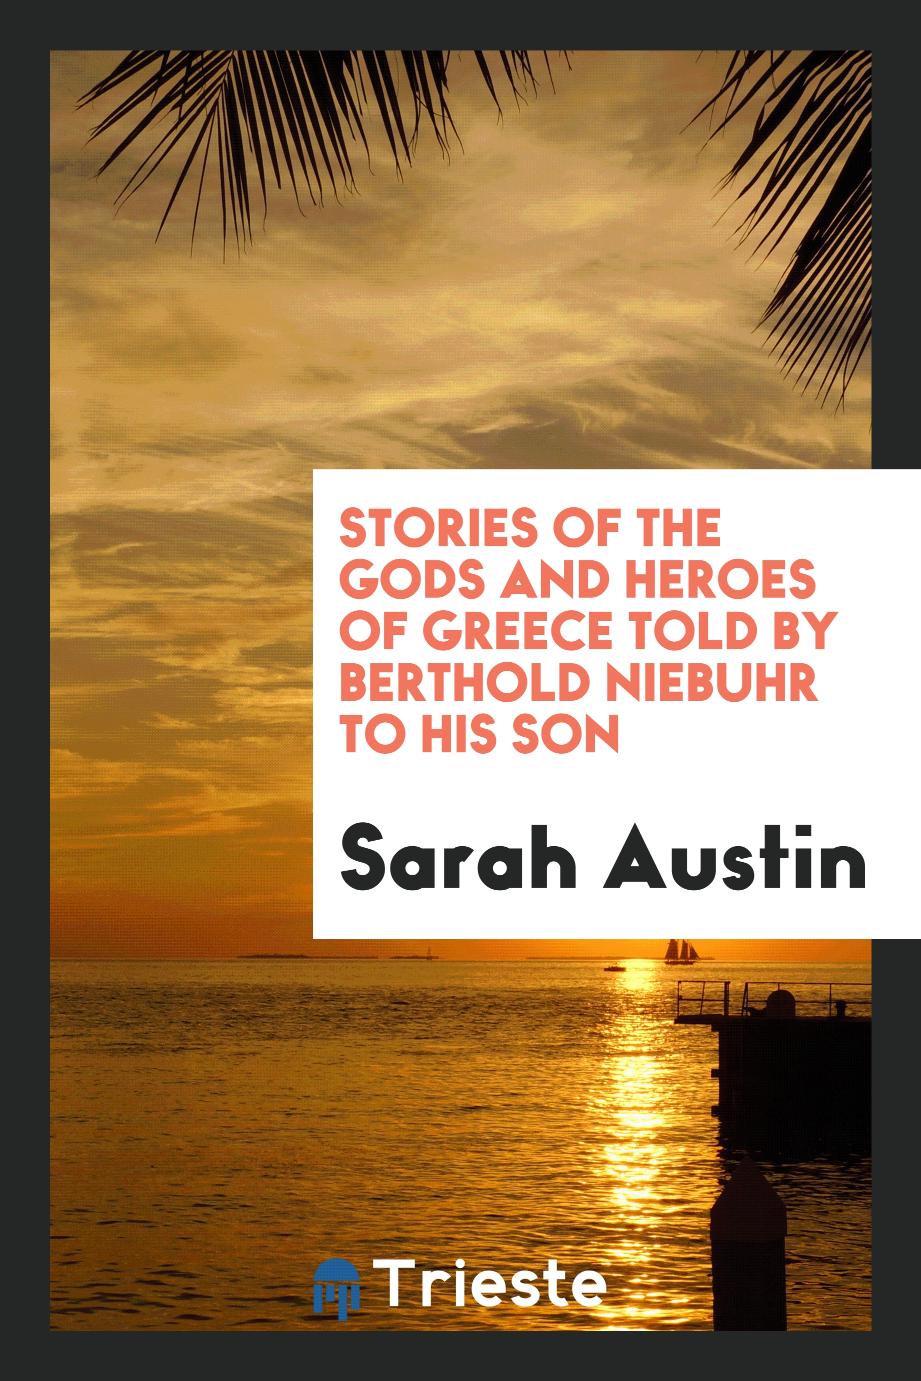 Stories of the gods and heroes of Greece told by Berthold Niebuhr to his Son